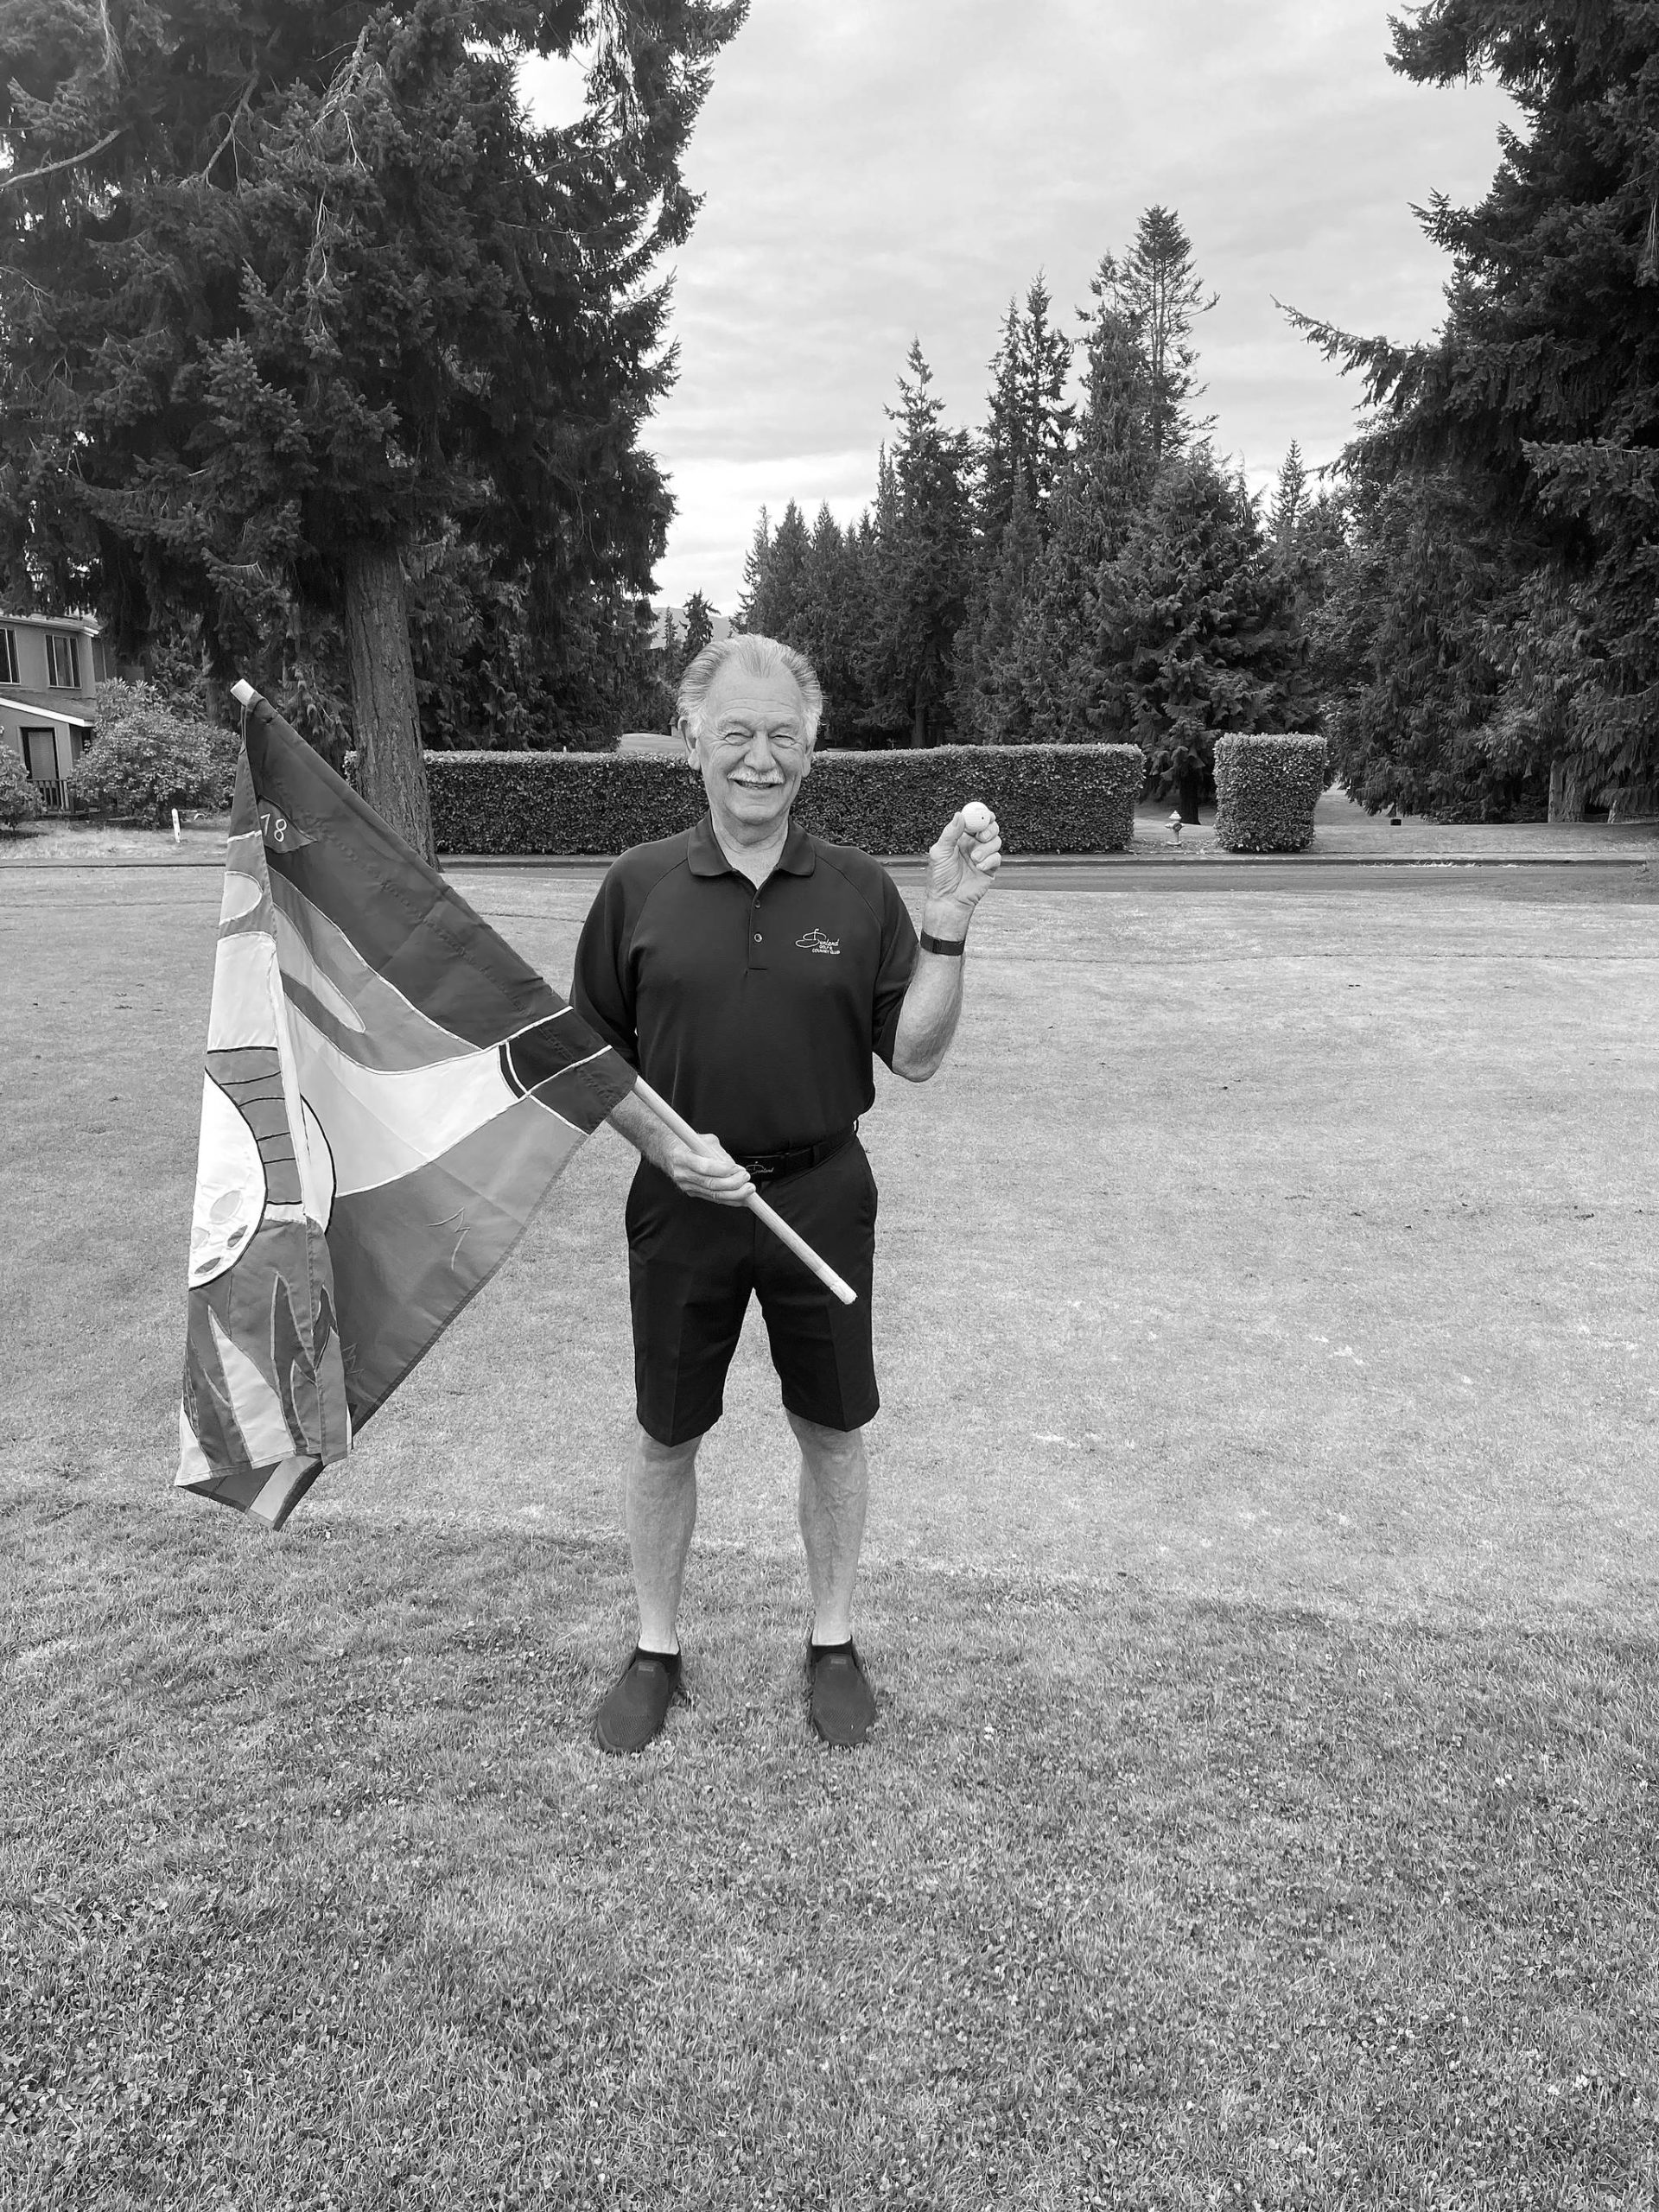 Gary Hester celebrates his first-ever hole-in-one at Sunland Golf & Country Club on Aug. 25. Hester drove the 125-yard hole No. 15 at Sunland for the ace, witnessed by Gary Peterson and Bill Alcayaga. Submitted photo